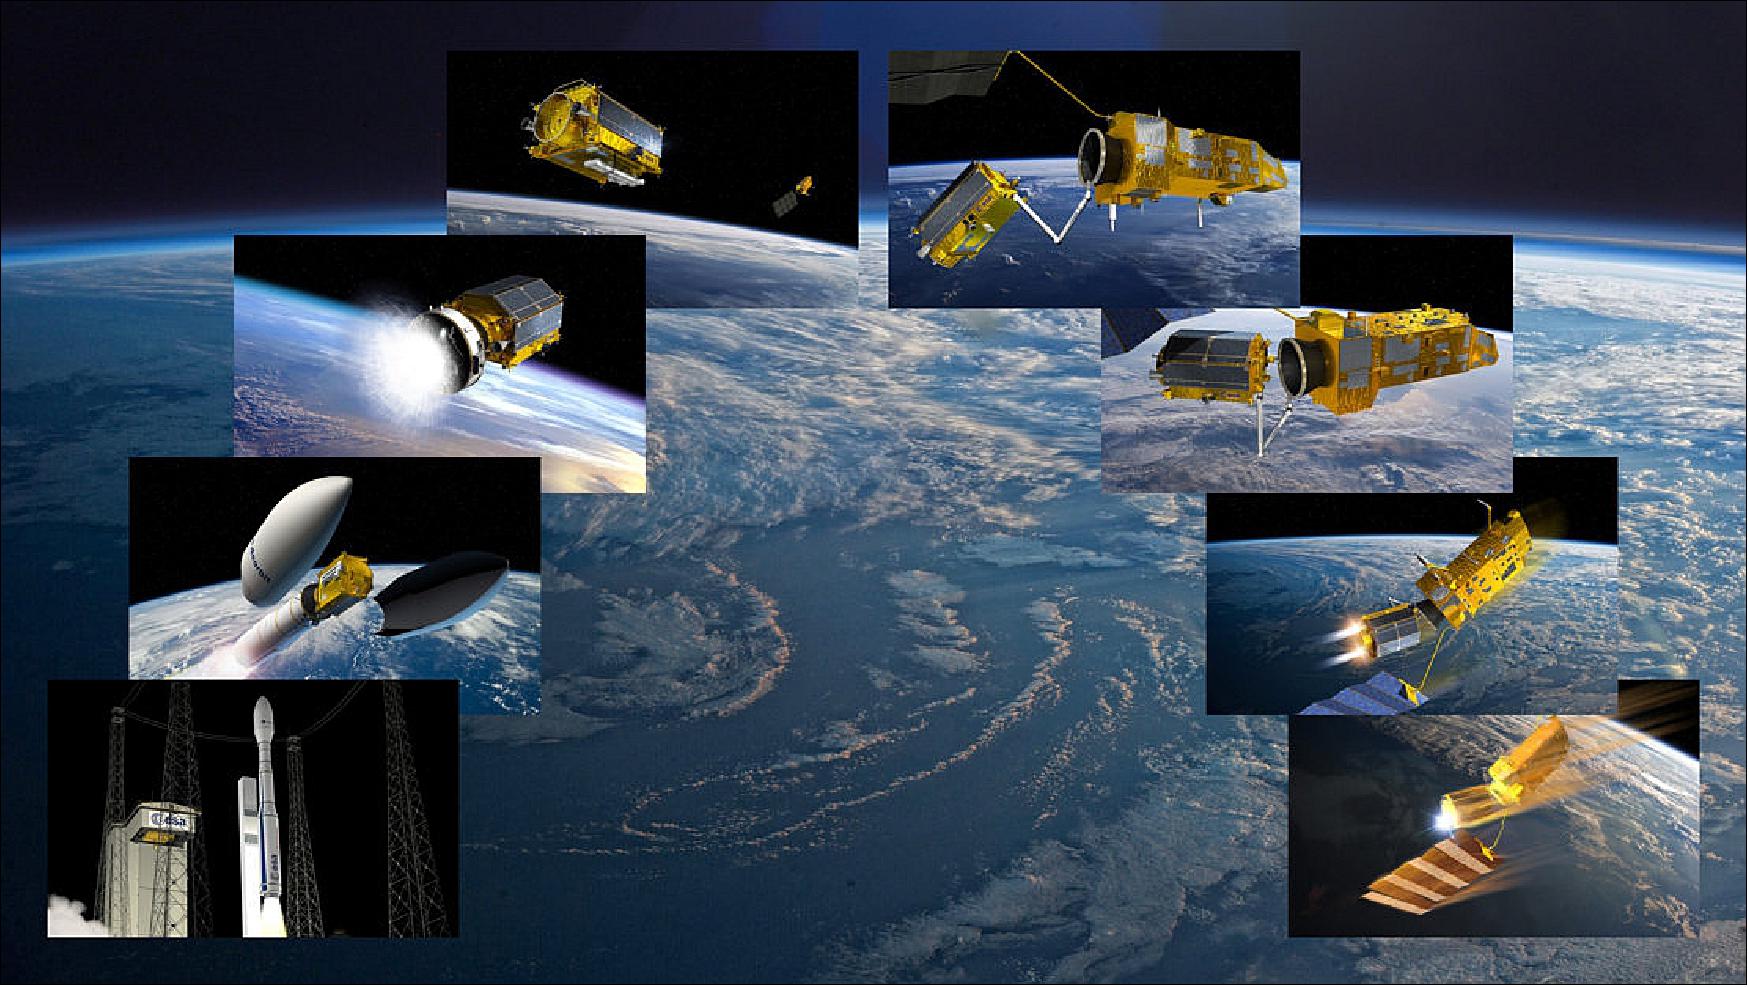 Figure 52: The mission life cycle from launch by Vega to reentry of e.Deorbit, an ESA mission to remove a single large ESA-owned debris from orbit, which will be the first-ever active debris removal mission. It will place European industry at the forefront of the world's active removal efforts and space tug applications. The mission was presented at ESA's Council meeting at Ministerial level, Lucerne, Switzerland, on 1-2 December 2016 (image credit: ESA, David Ducros, 2016) 31)